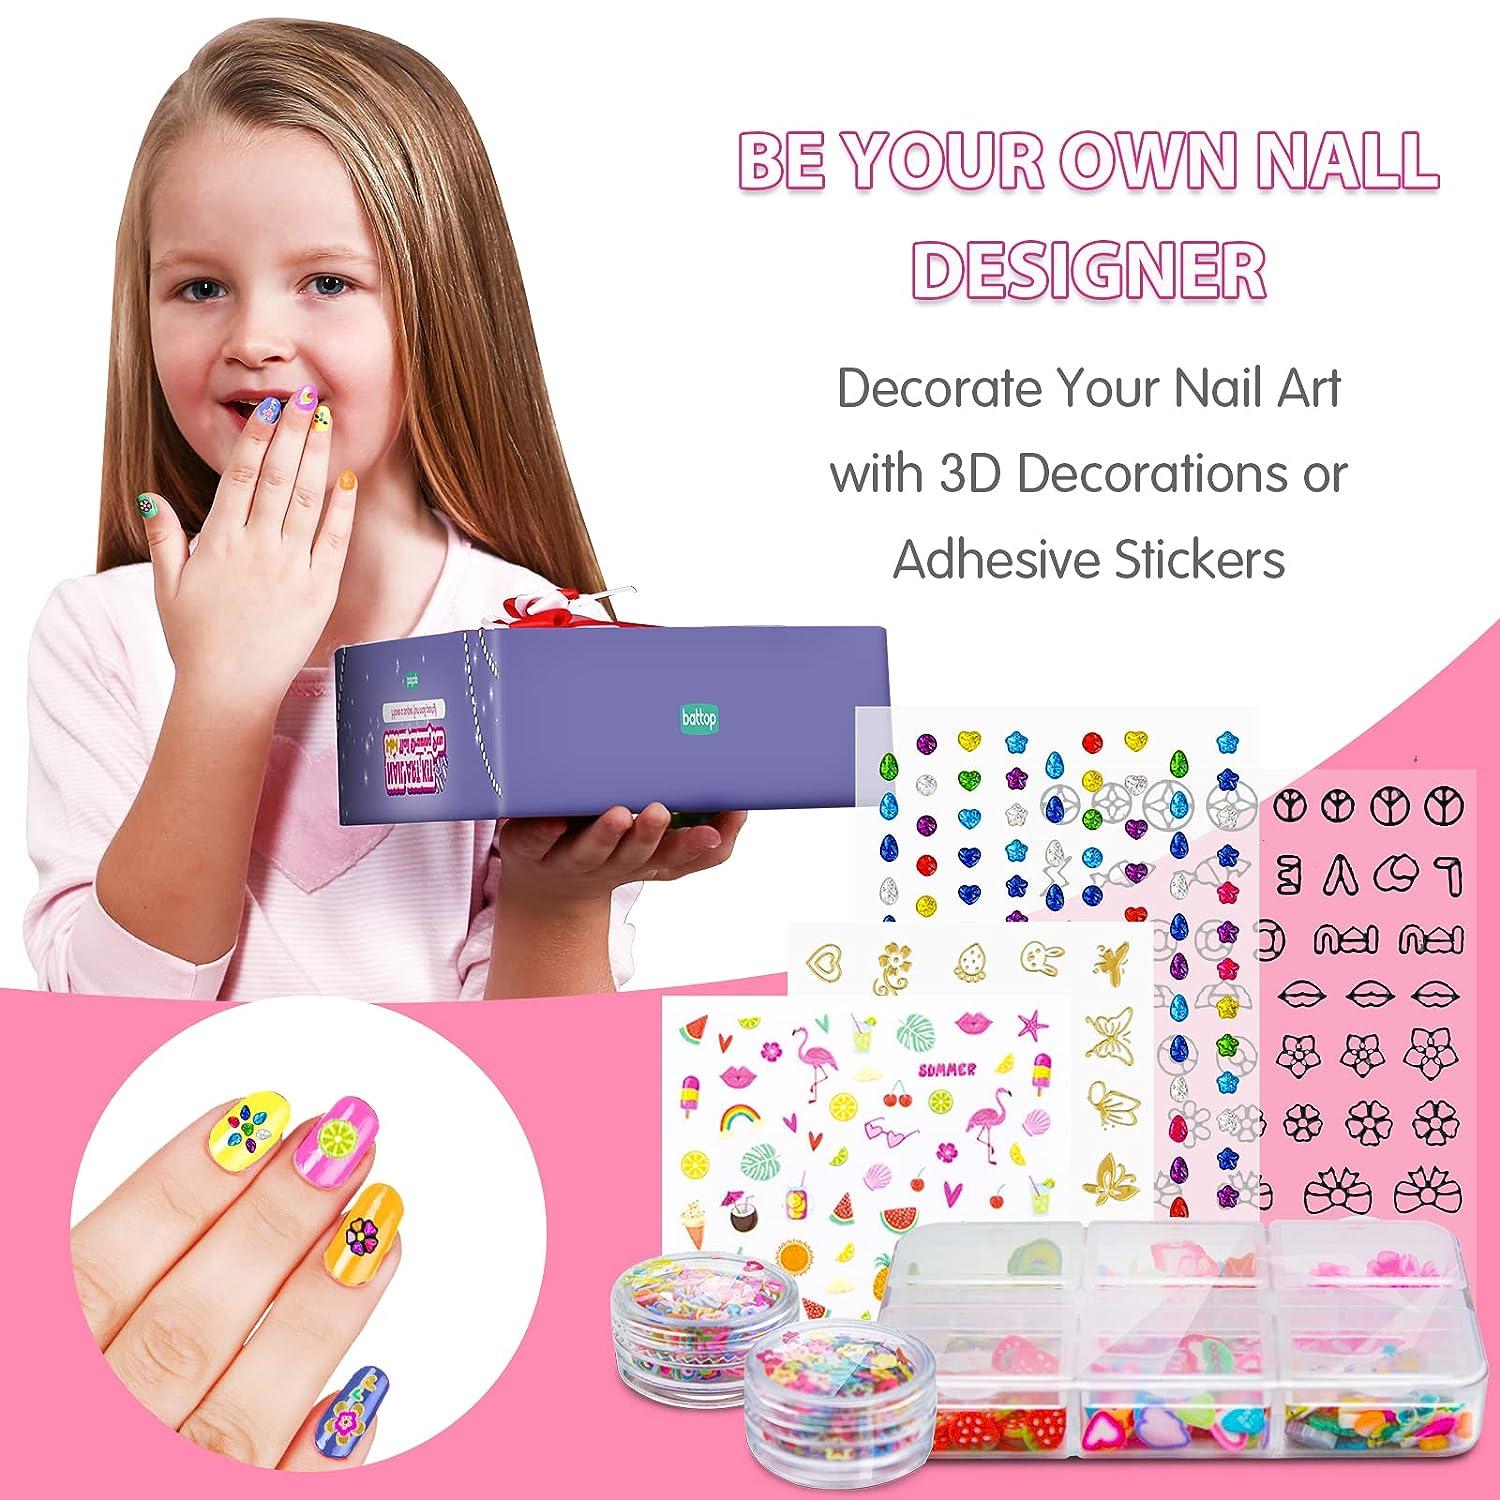 BATTOP Kids Nail Polish Set for Girls Nail Art Kit for Girls Ages 7-15 3 IN  1 Nail Polish Pen Combo Glitter with 3D Nail Decoration Accessories Perfect  Gifts for girls